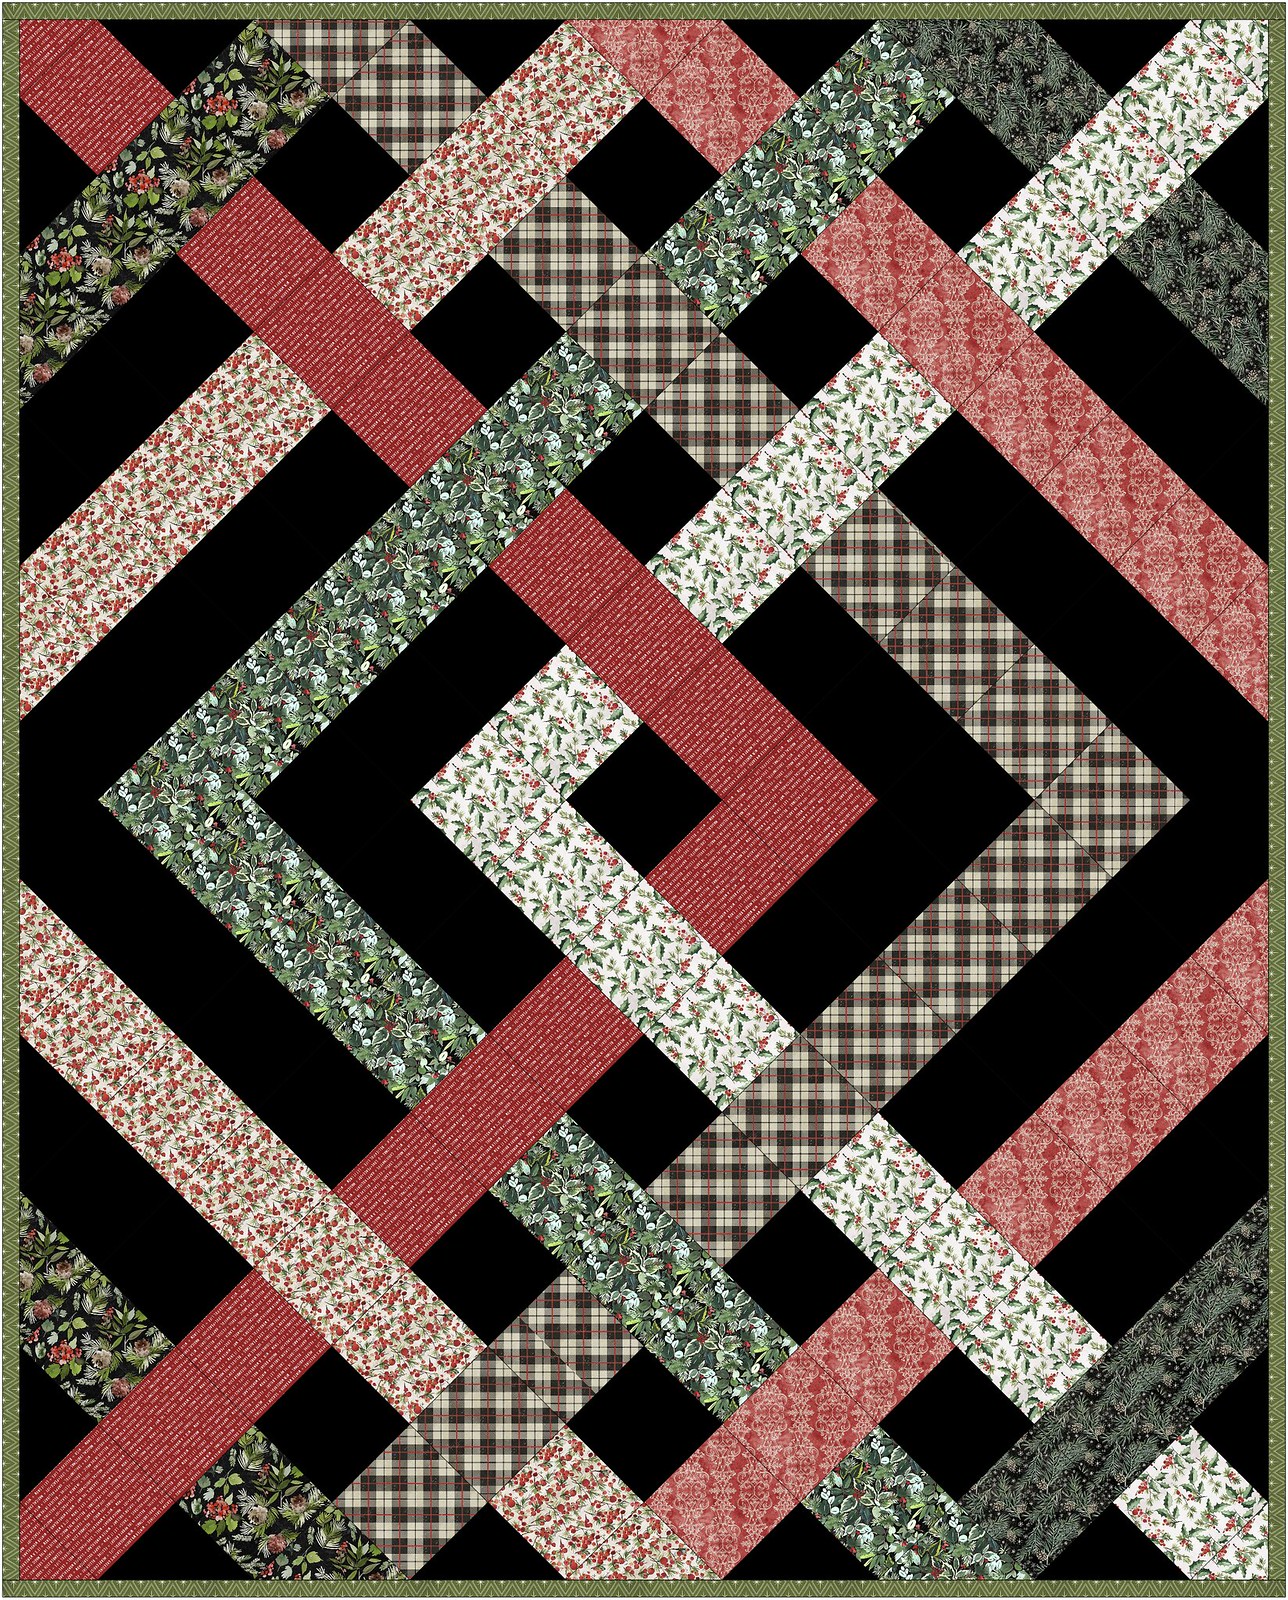 The Eliza Quilt in Christmastime